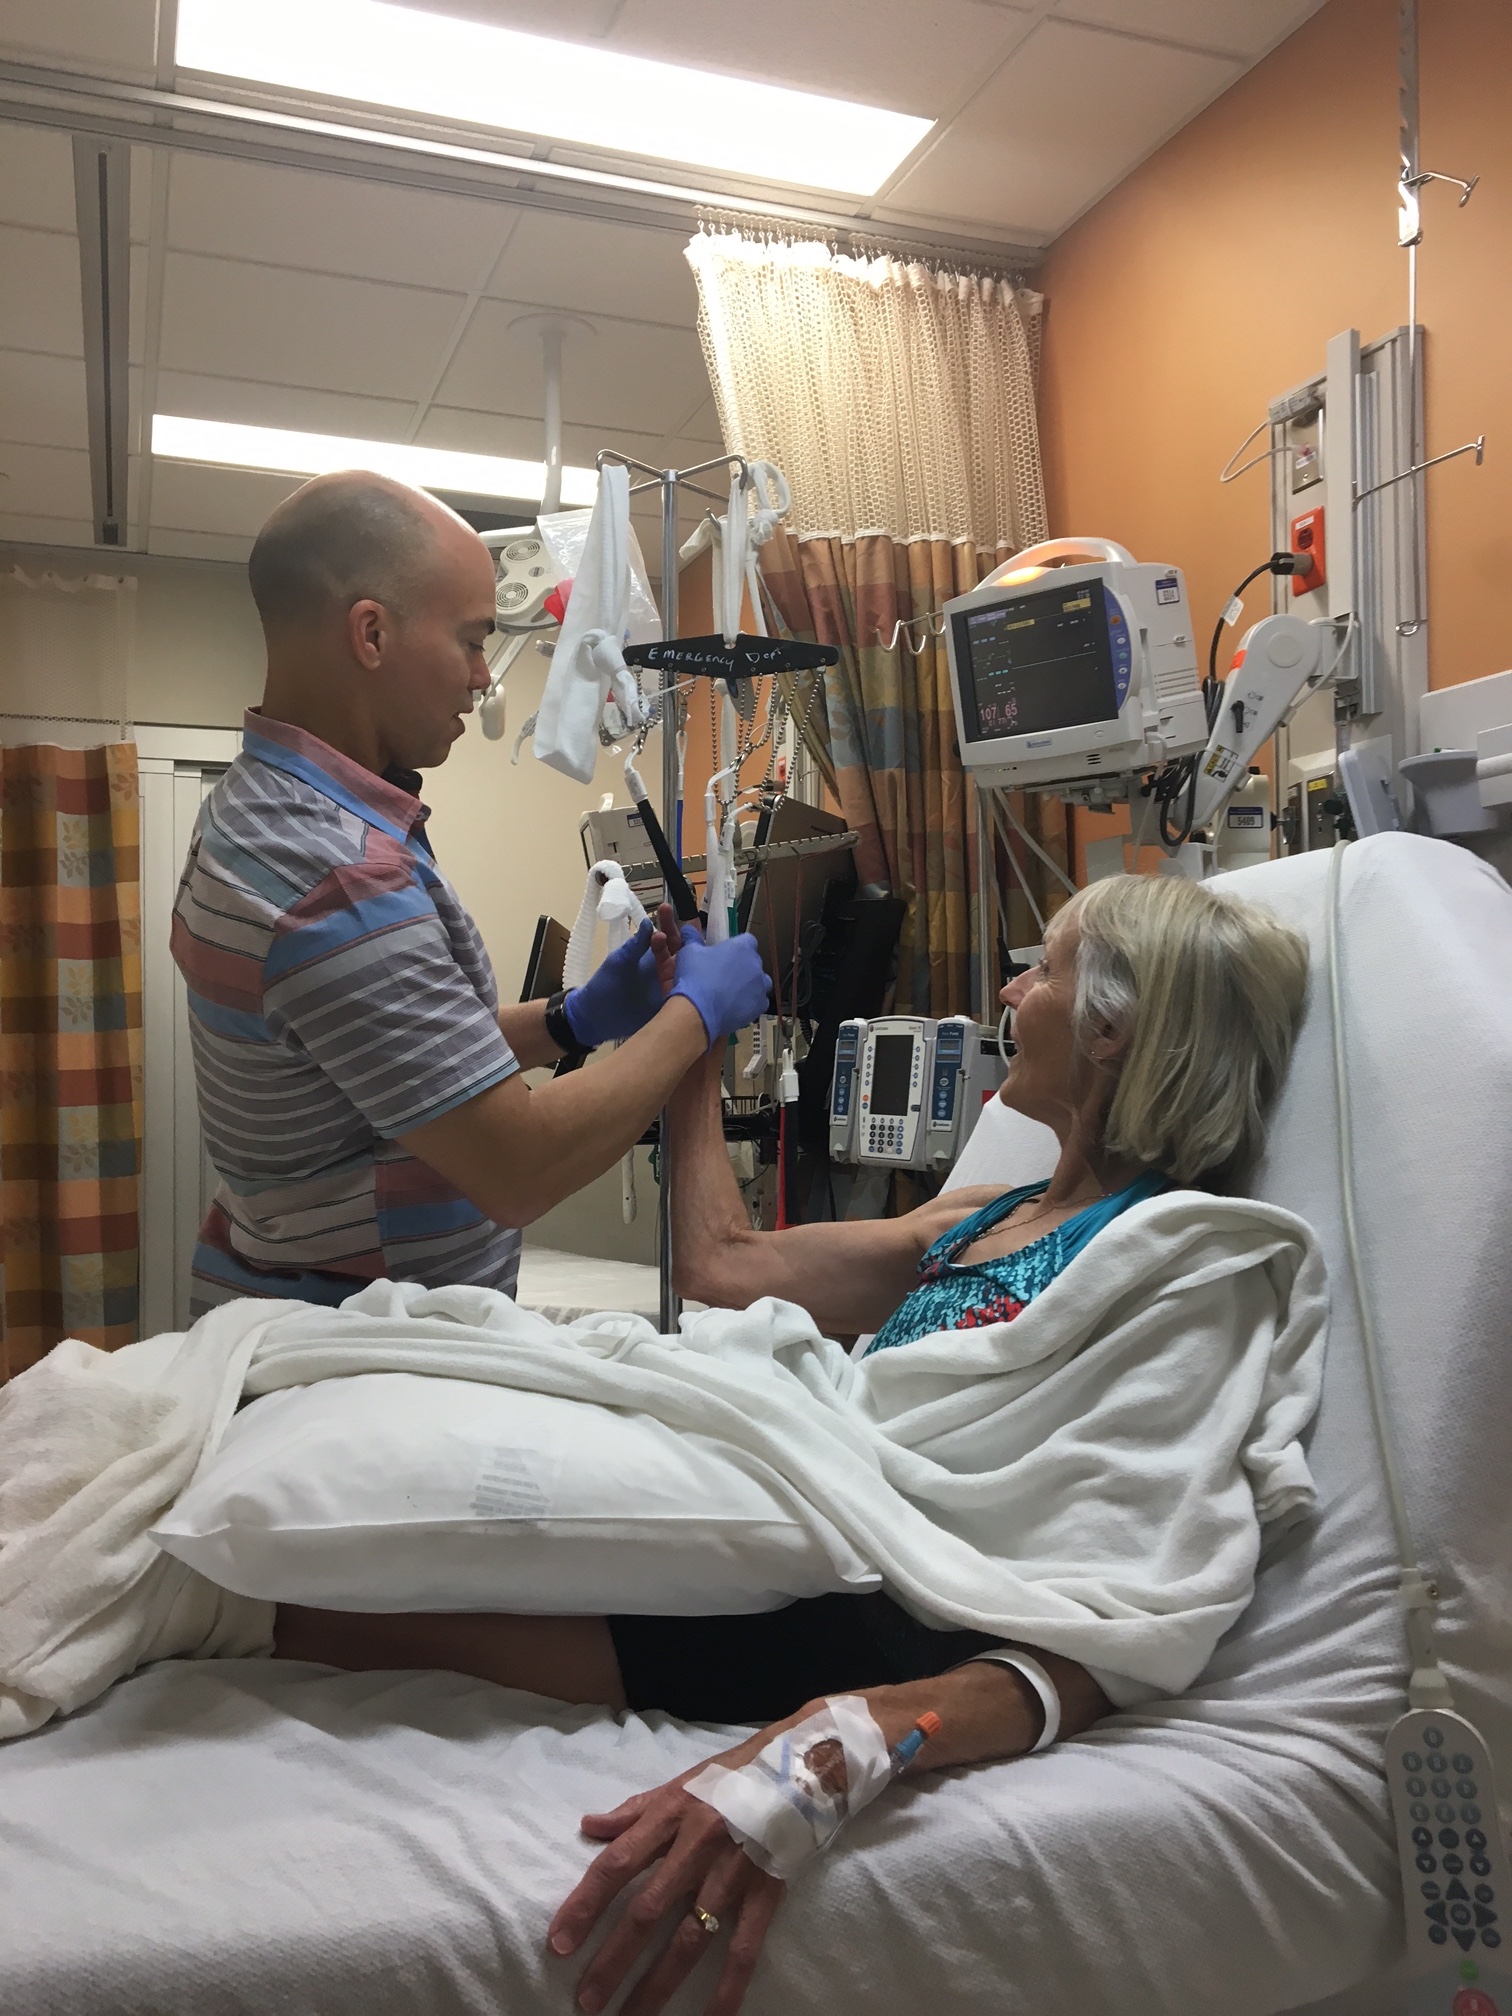 Remembering my ER visit after breaking arm in July 2017.